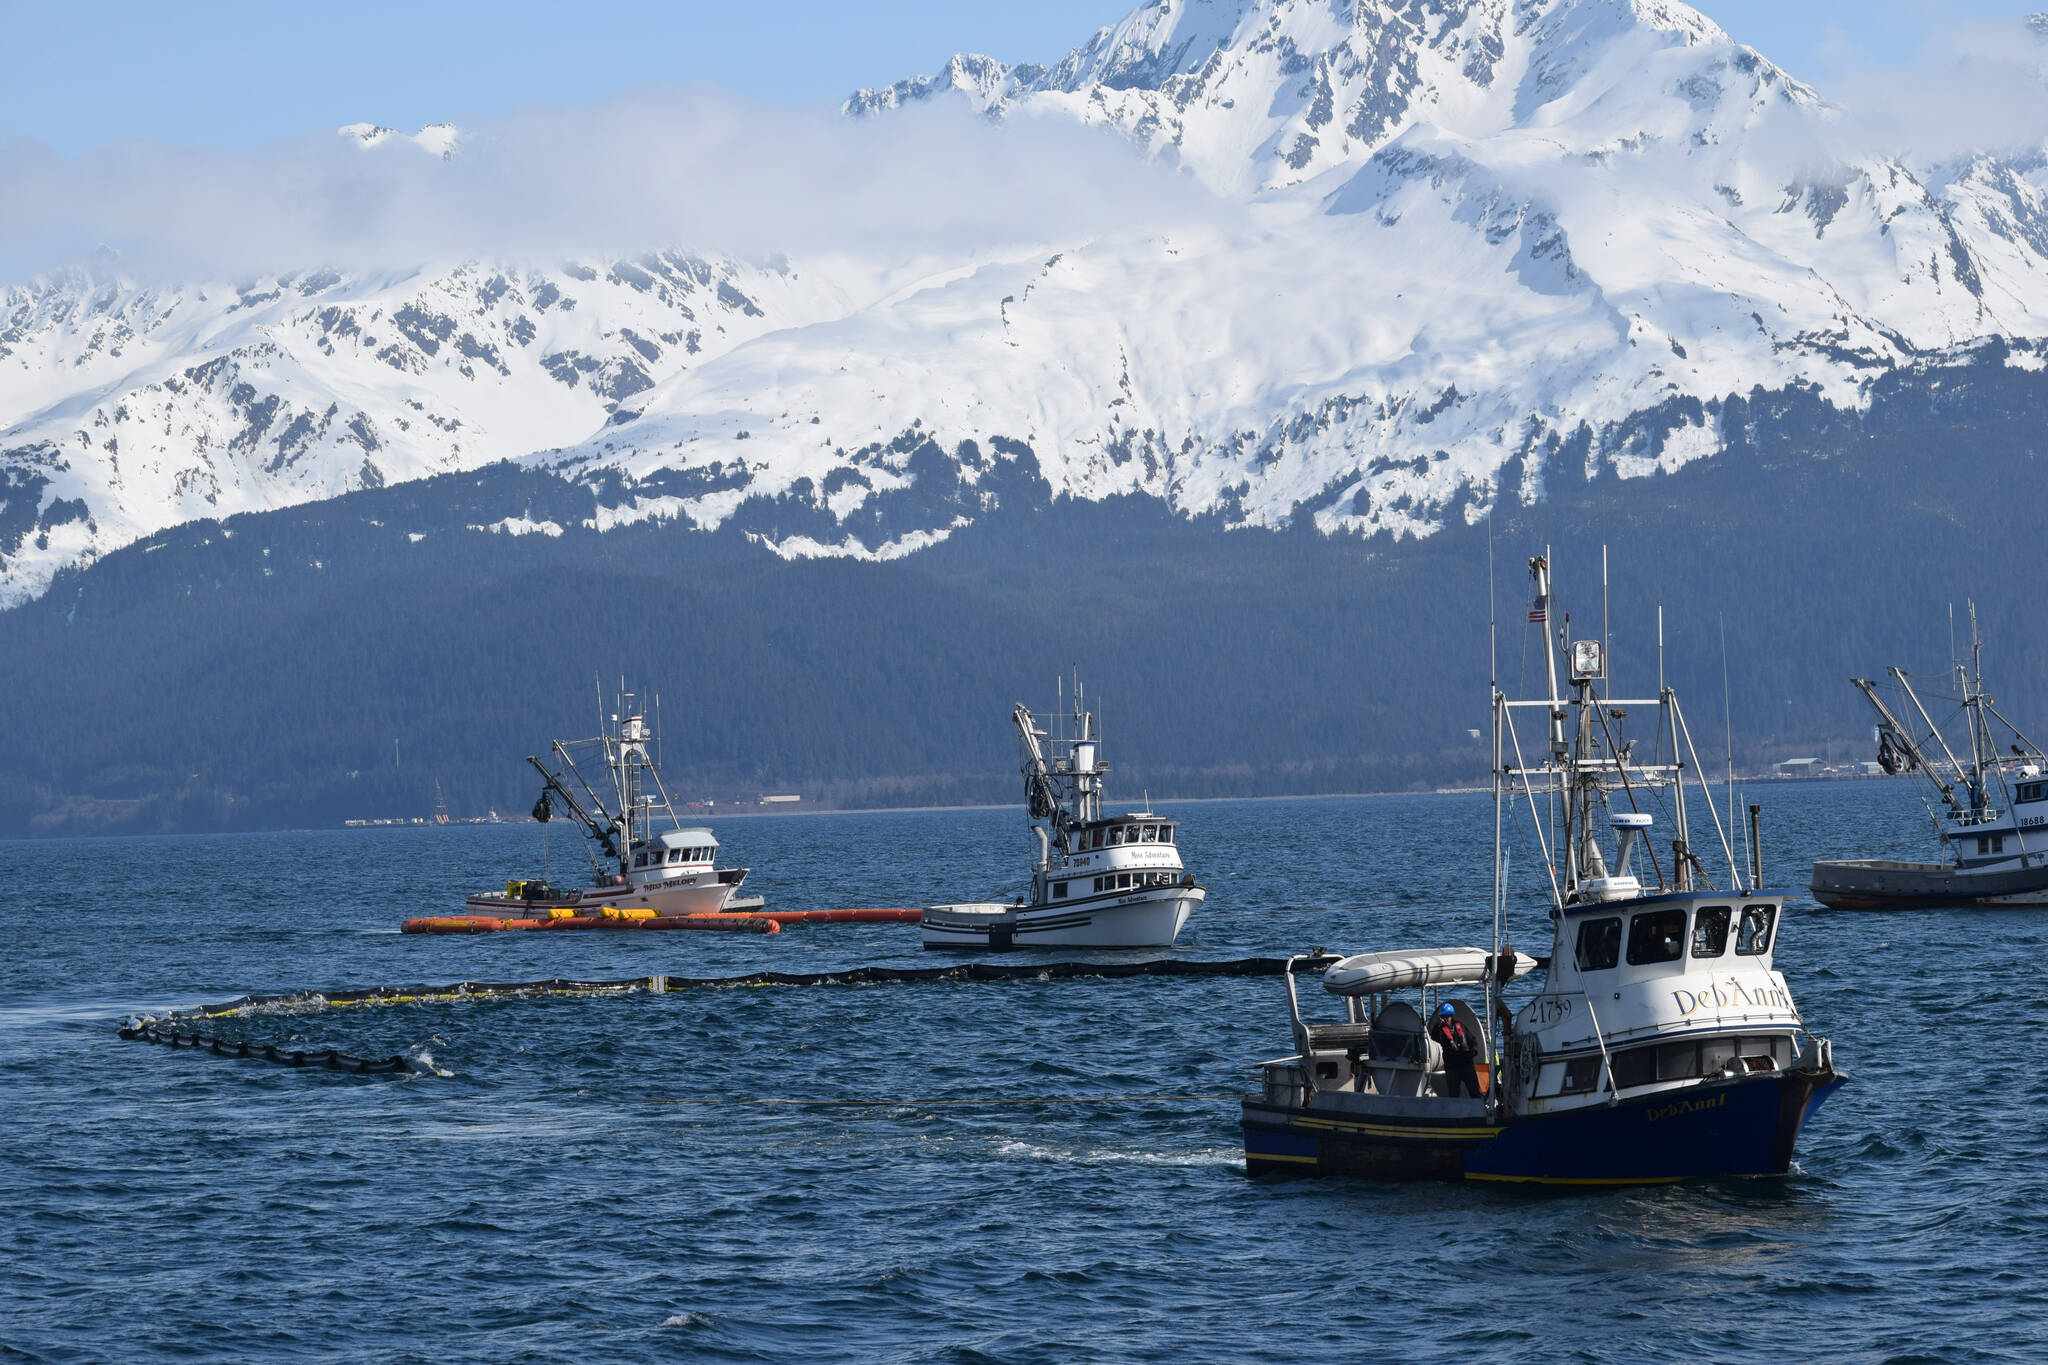 A fishing vessel fleet off the coast of Seward, Alaska, participates in oil spill response training hosted by the Prince William Sound Regional Citizens’ Advisory Council (RCAC), along with members of the Alyeska Pipeline Service Company, on Thursday, April 14, 2022. (Camille Botello/Peninsula Clarion)